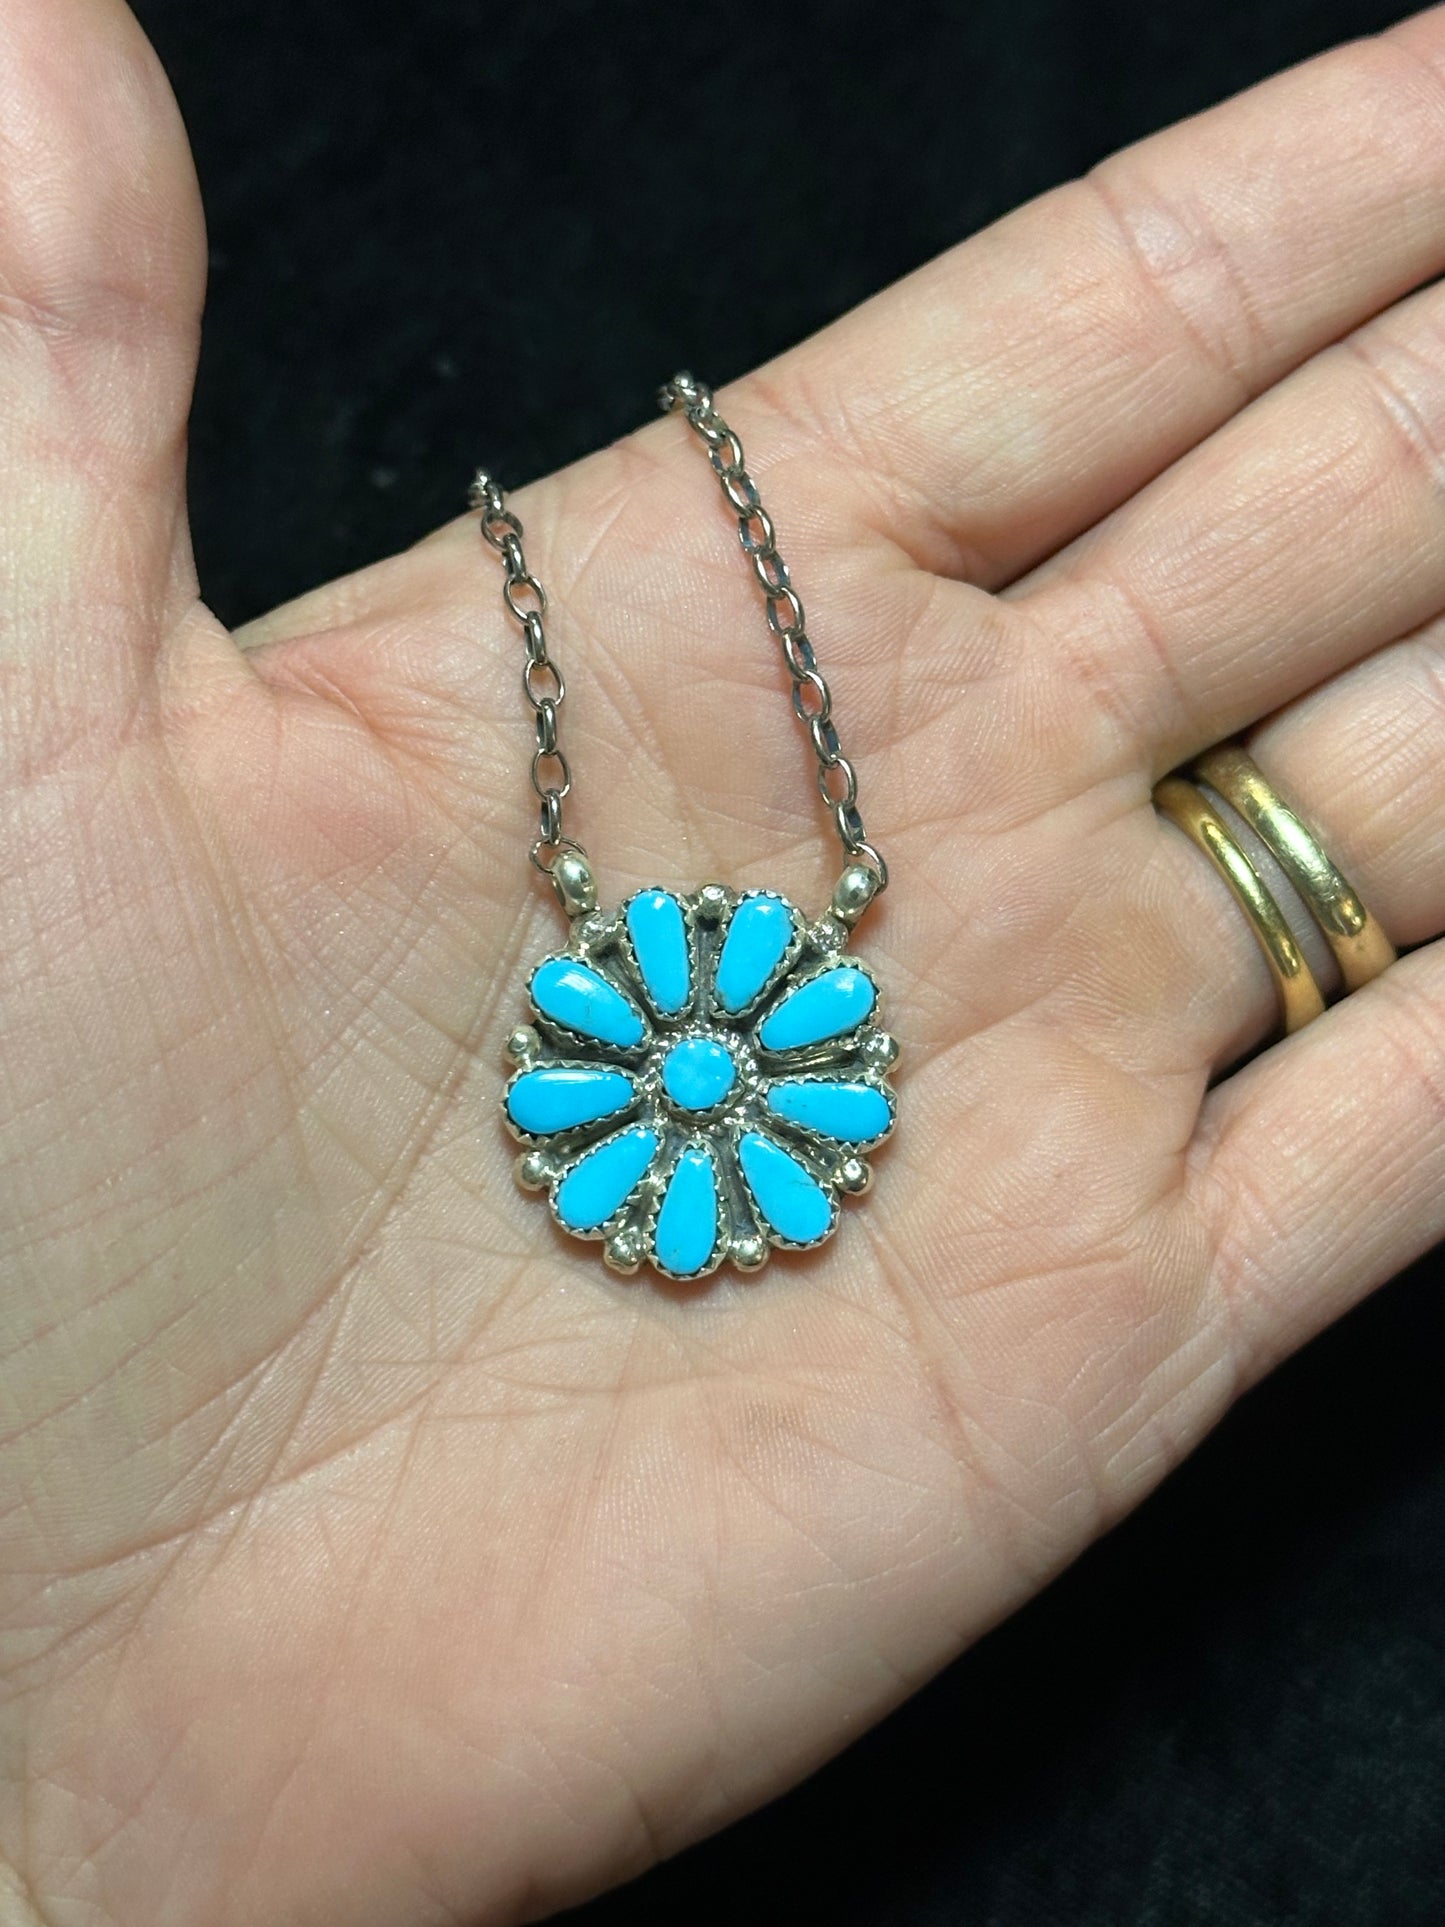 16" Turquoise Necklace by Alicia Wilson, Navajo